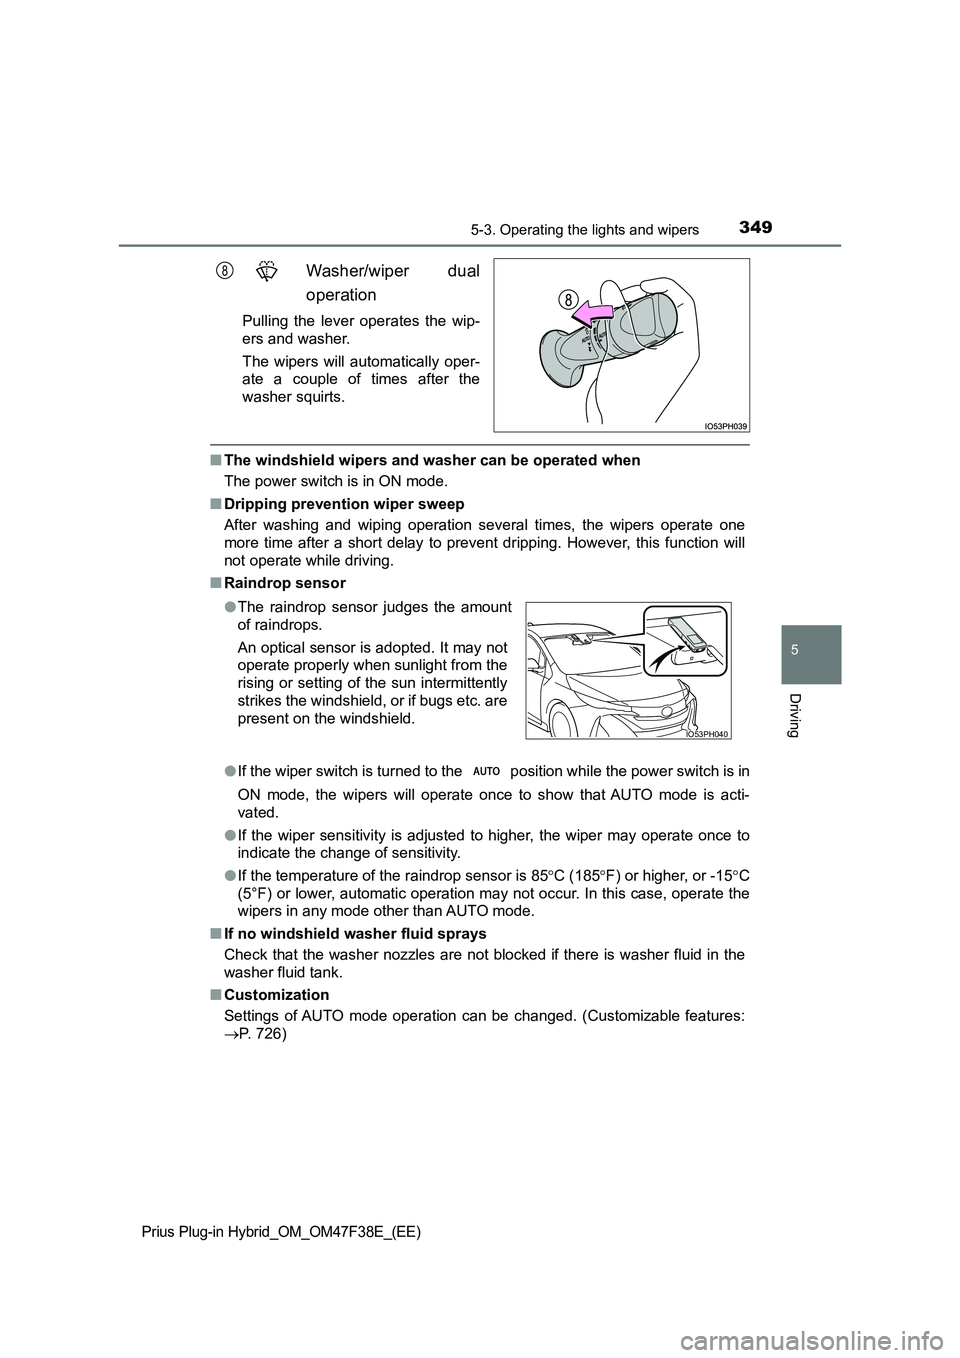 TOYOTA PRIUS PLUG-IN HYBRID 2023  Owners Manual 3495-3. Operating the lights and wipers
Prius Plug-in Hybrid_OM_OM47F38E_(EE)
5
Driving
Washer/wiper dual 
operation
Pulling the lever operates the wip- 
ers and washer. 
The wipers will automatically